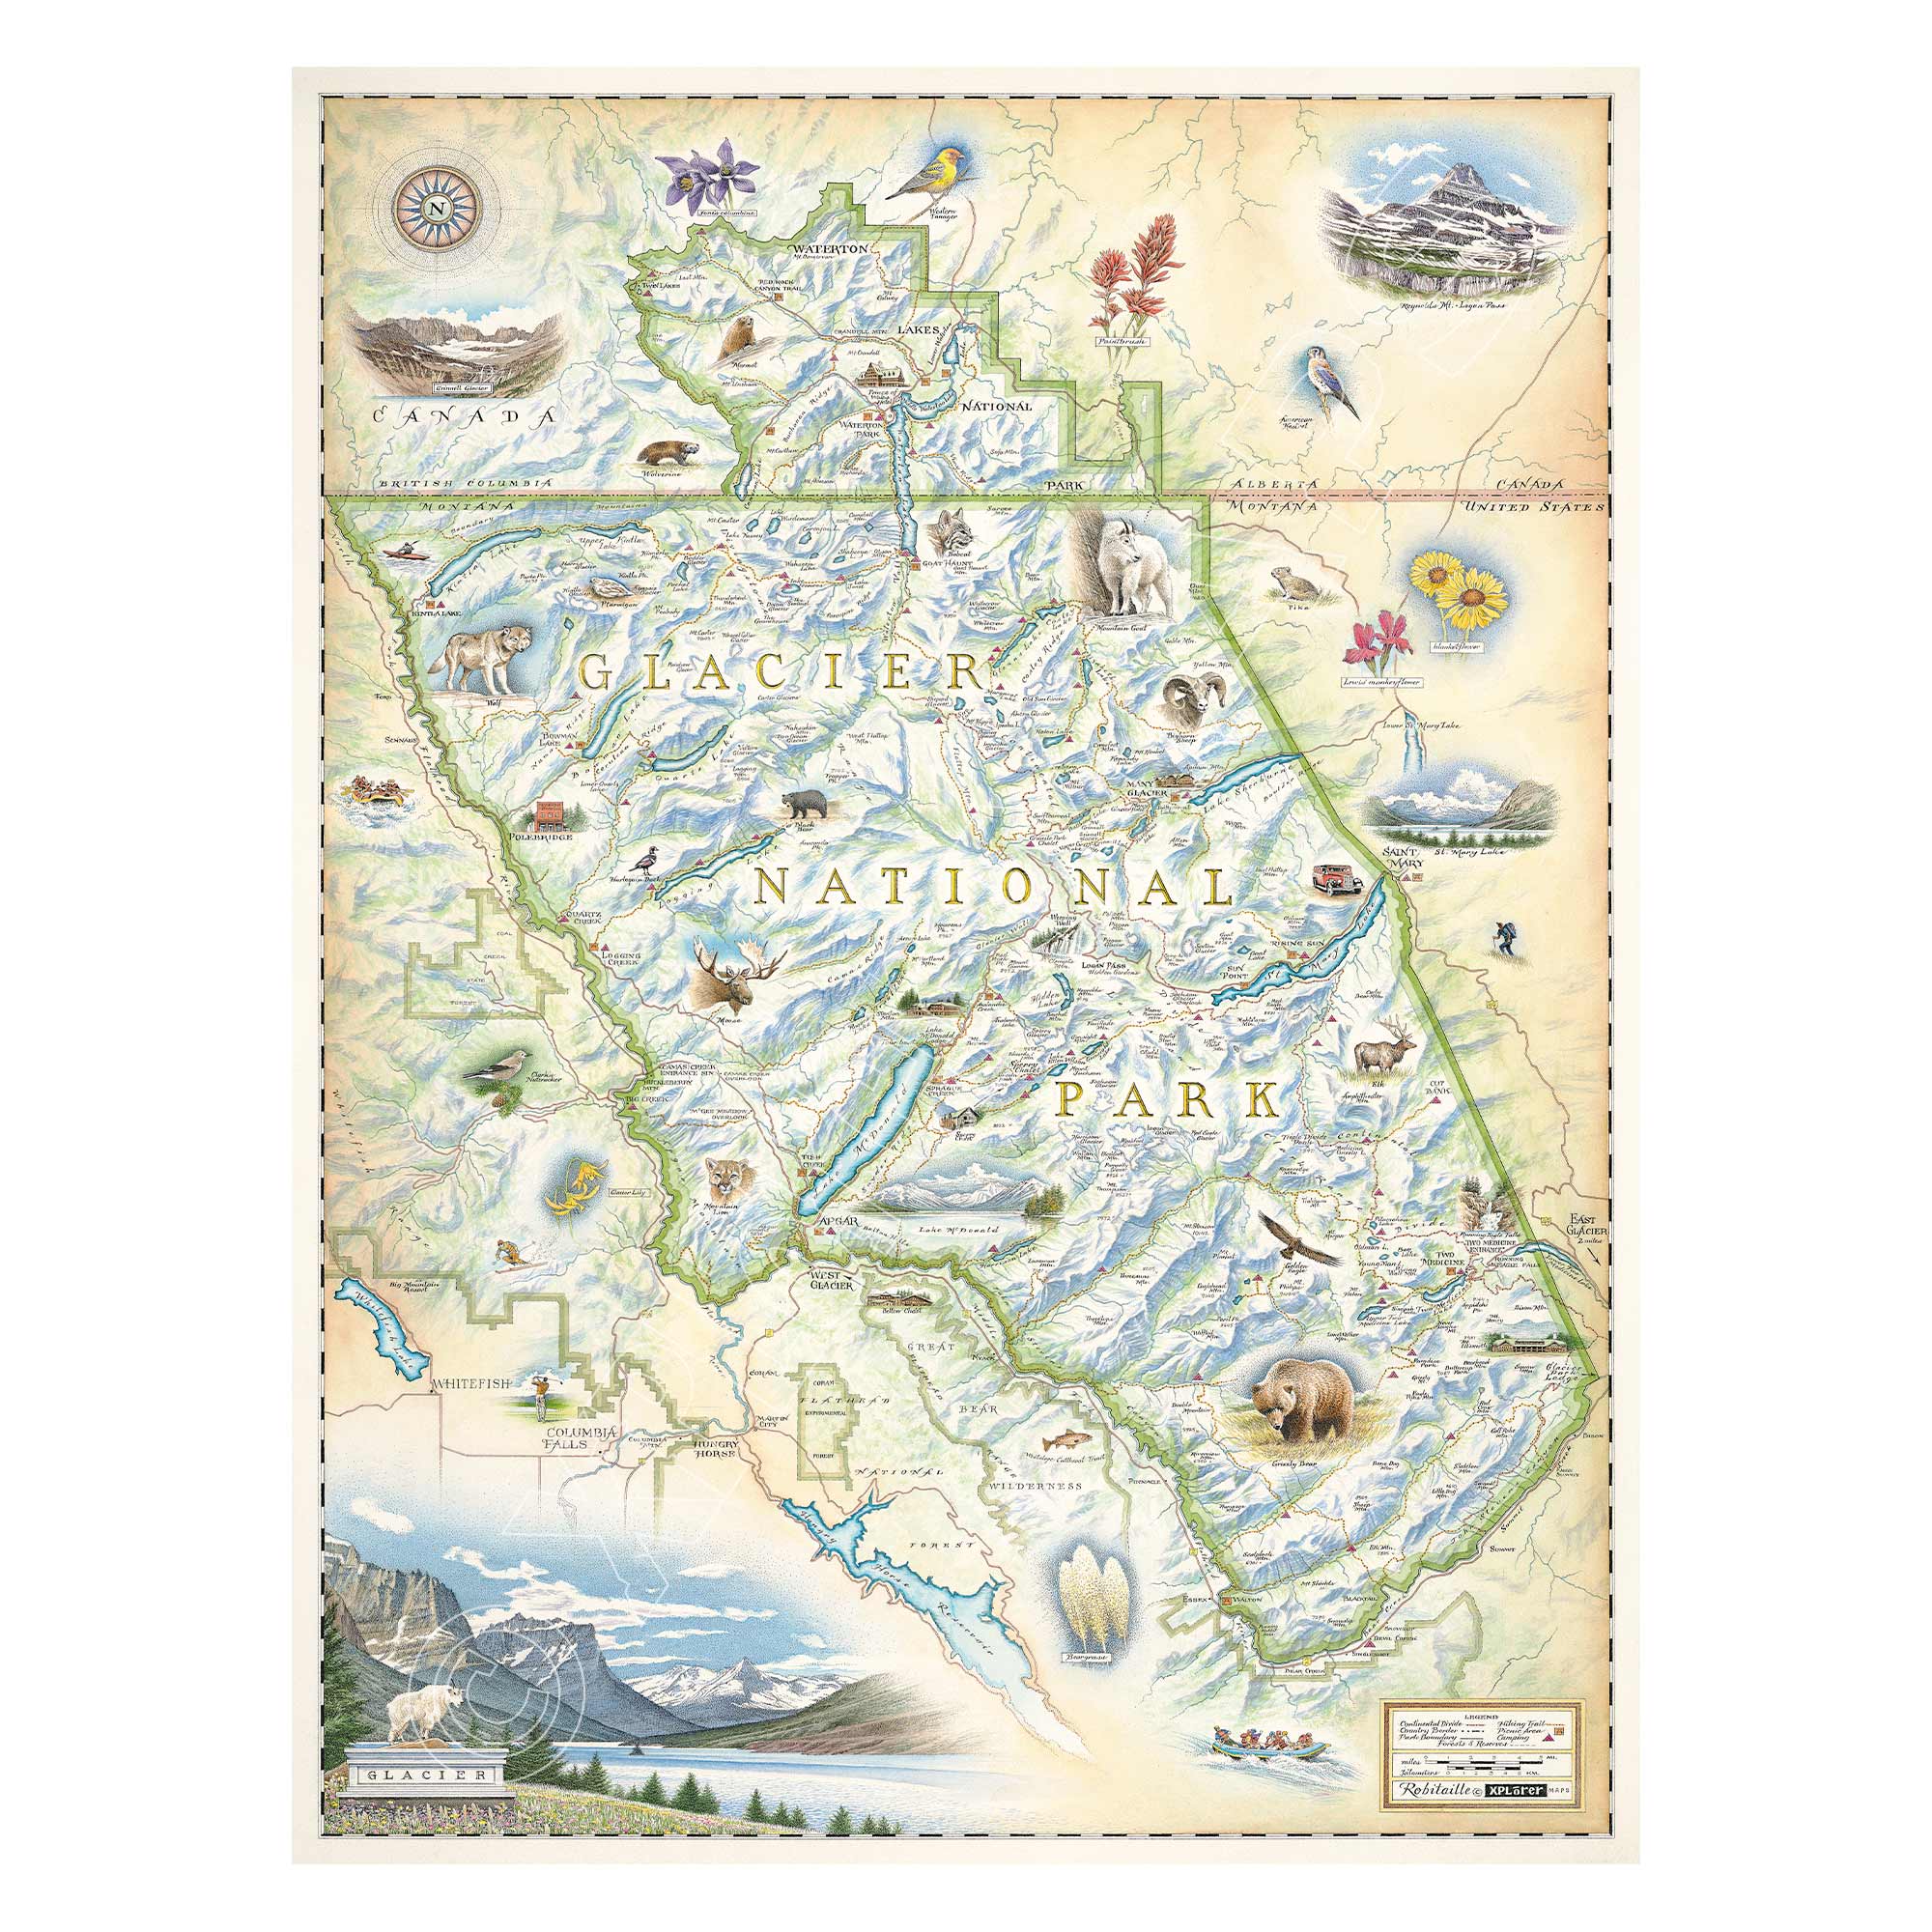 Glacier National Park hand-drawn map in earth tones of beige and blue. The map features places in the park such as Logan Pass, Lake McDonald Lodge, Many Glacier Lodge, Two Medicine, Glacier Park Lodge, and the Going-to-the-sun road. Flora and fauna include grizzly bear, elk, moose, mountain goat, and mountain lion. Measures 18x24.